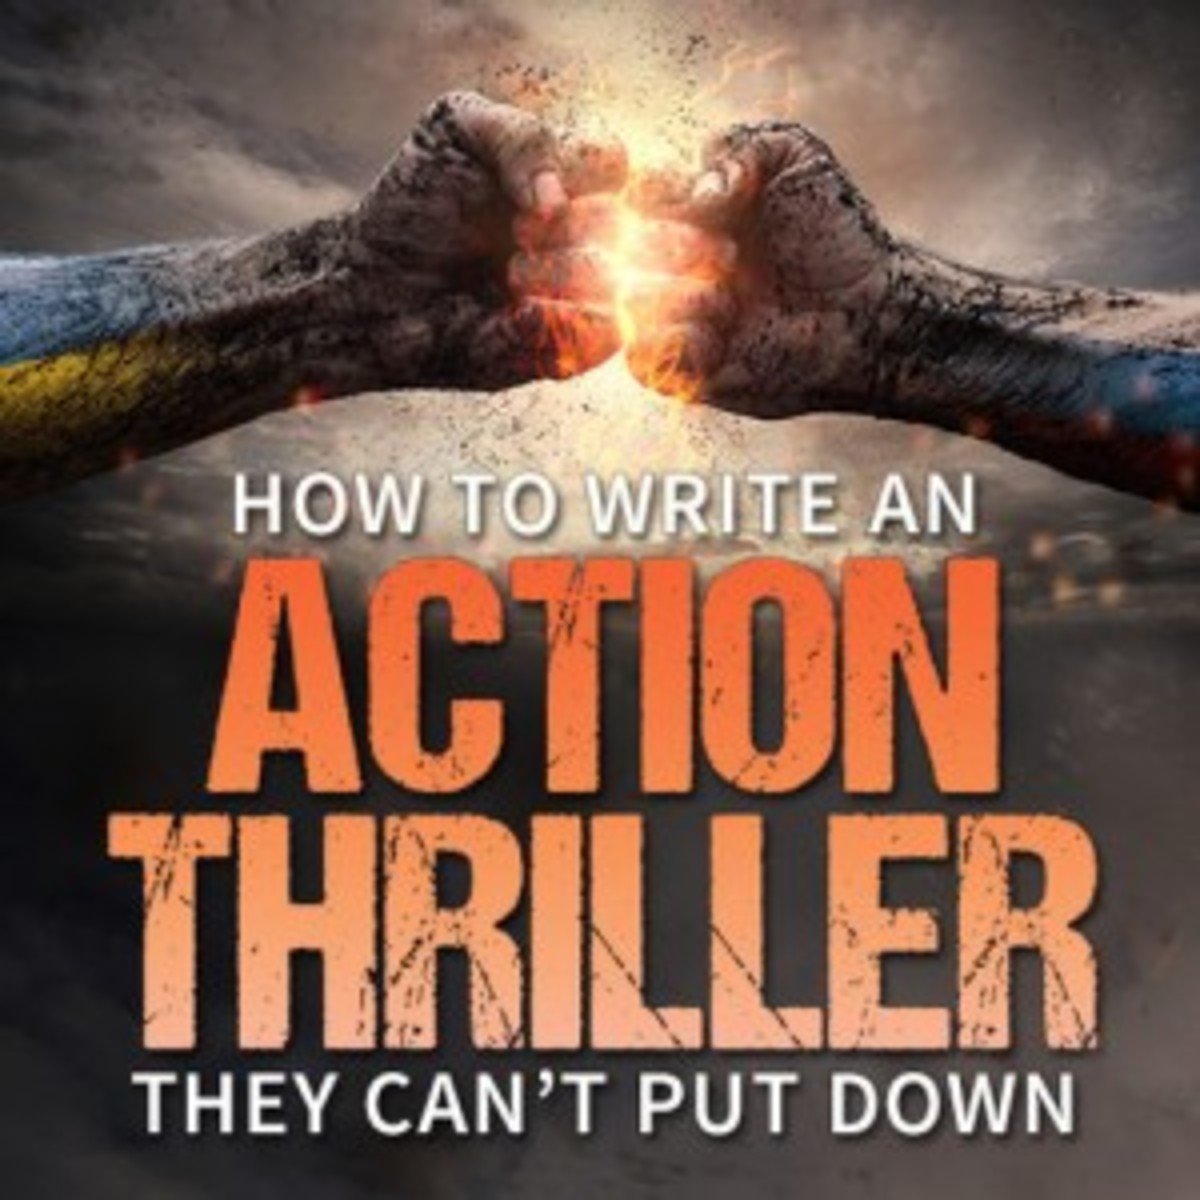 How to Write An Action Thriller They Can’t Put Down